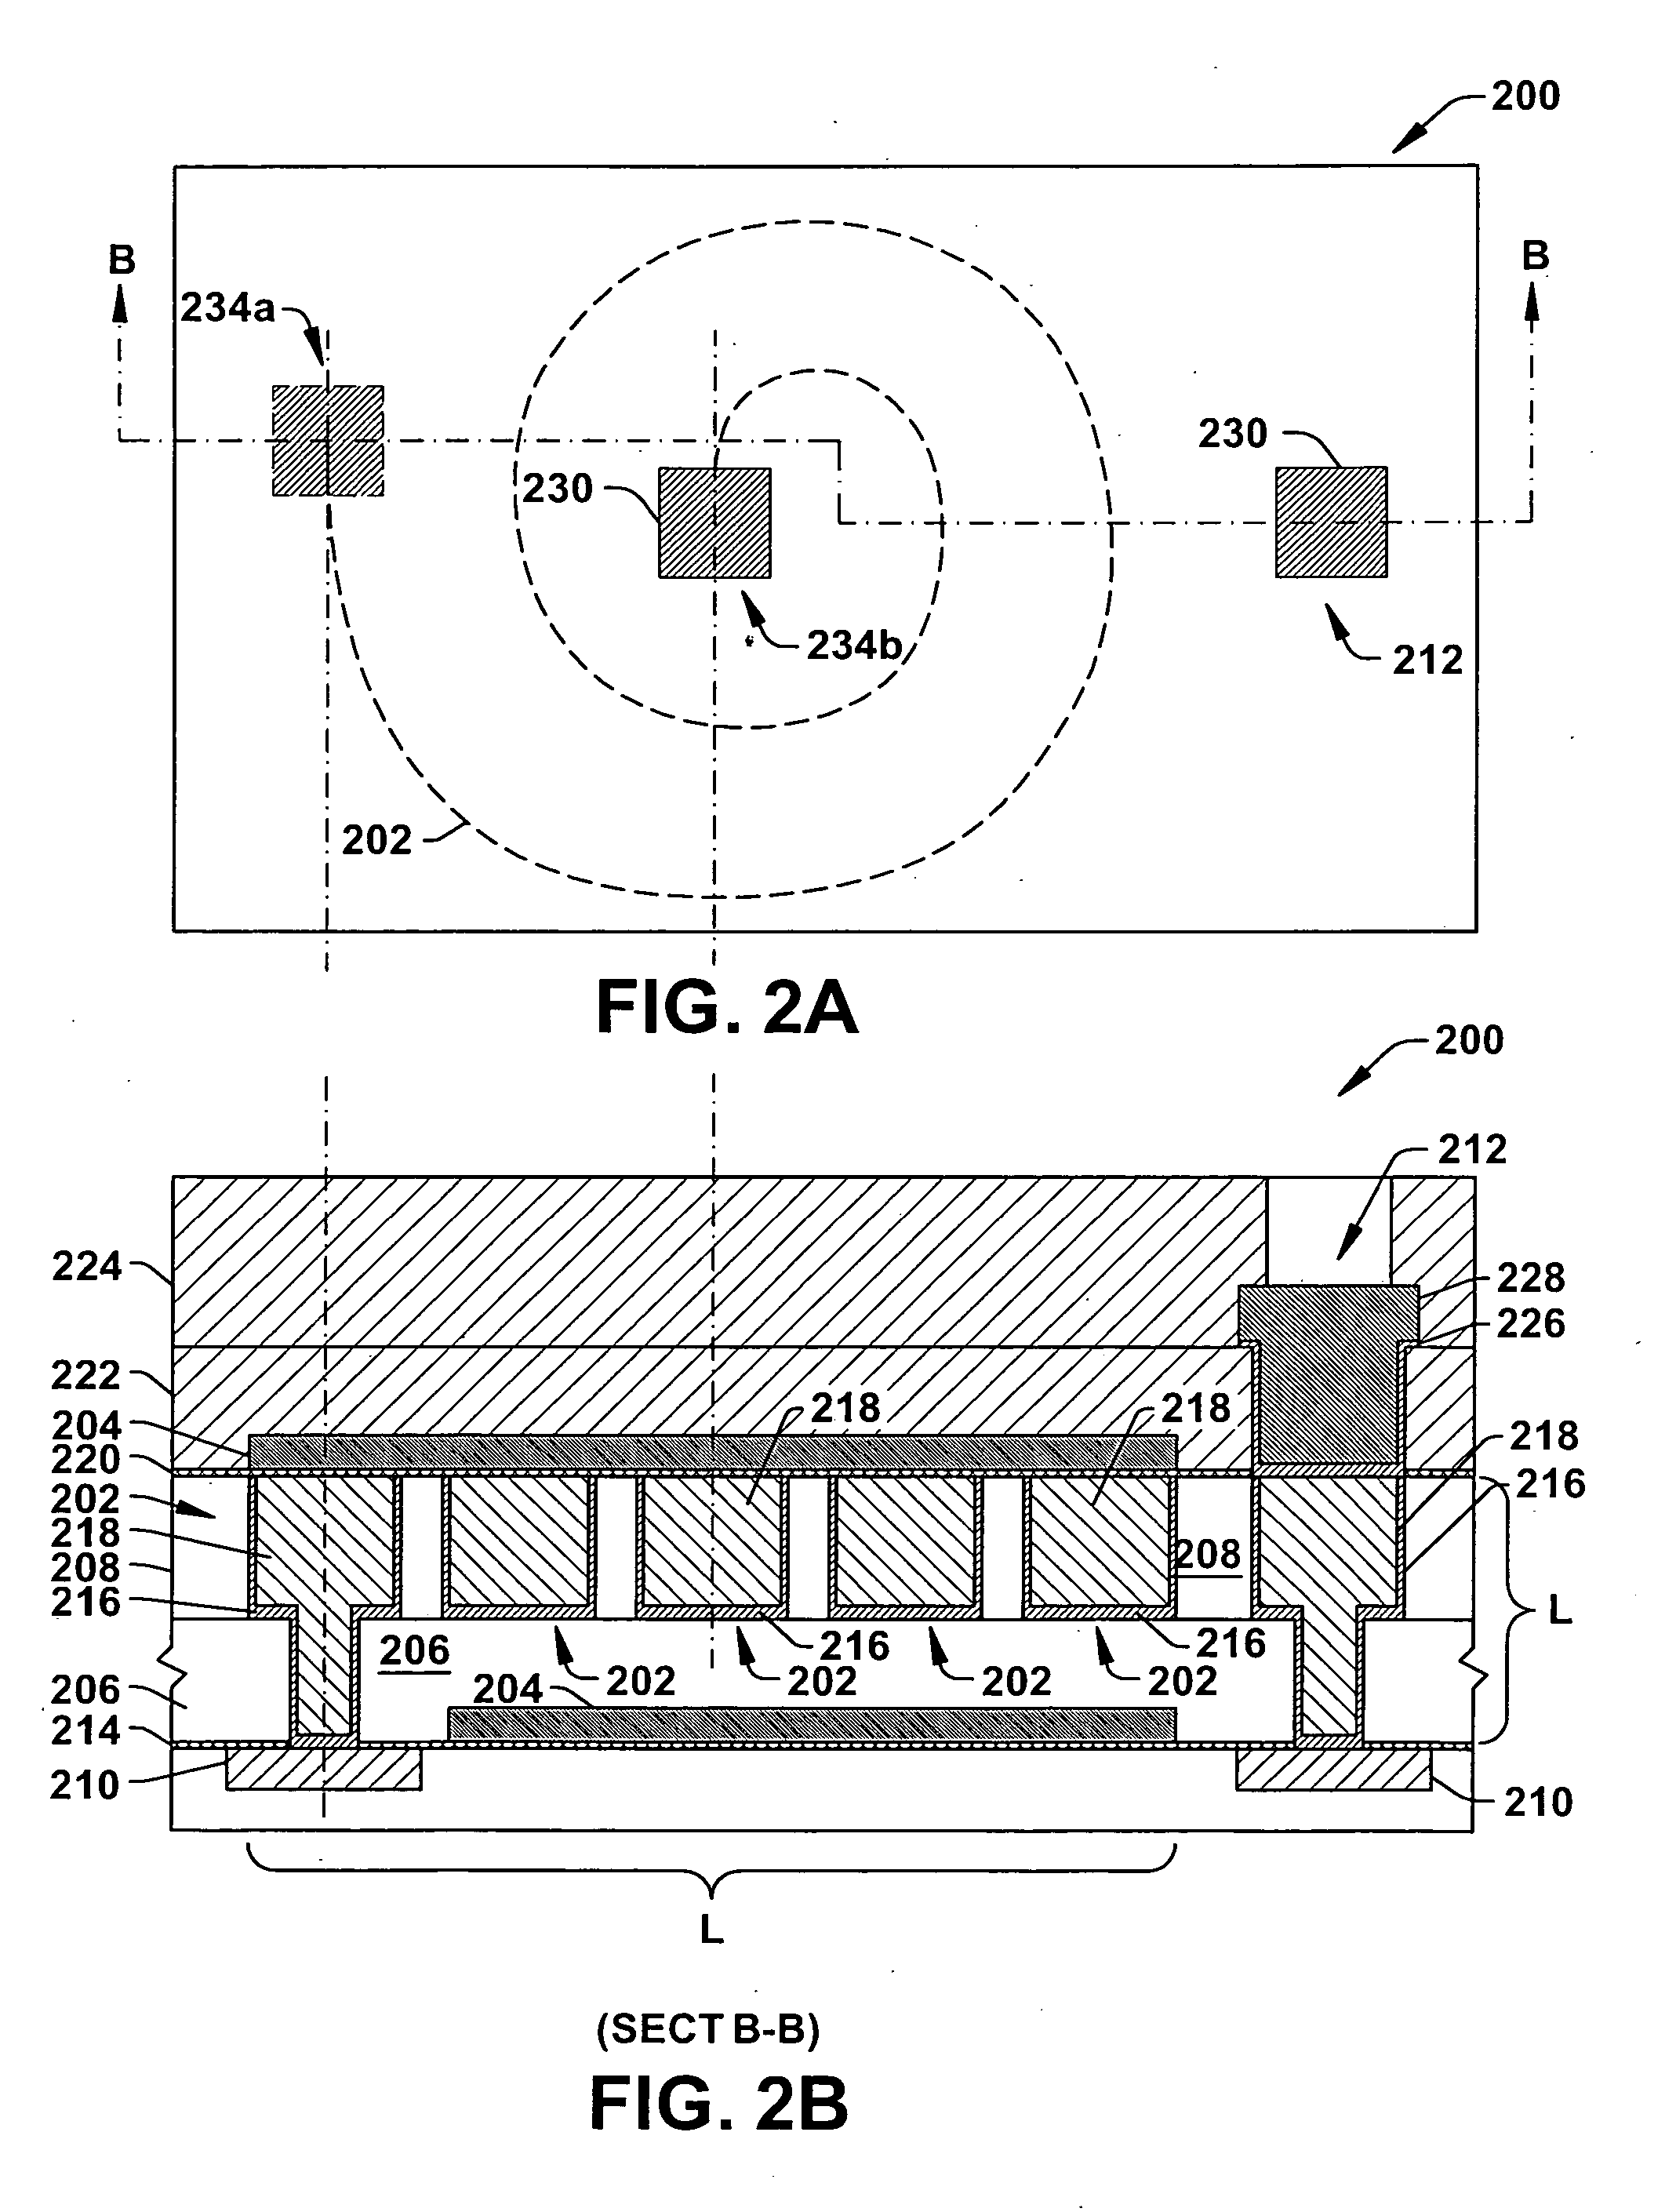 Method to improve inductance with a high-permeability slotted plate core in an integrated circuit